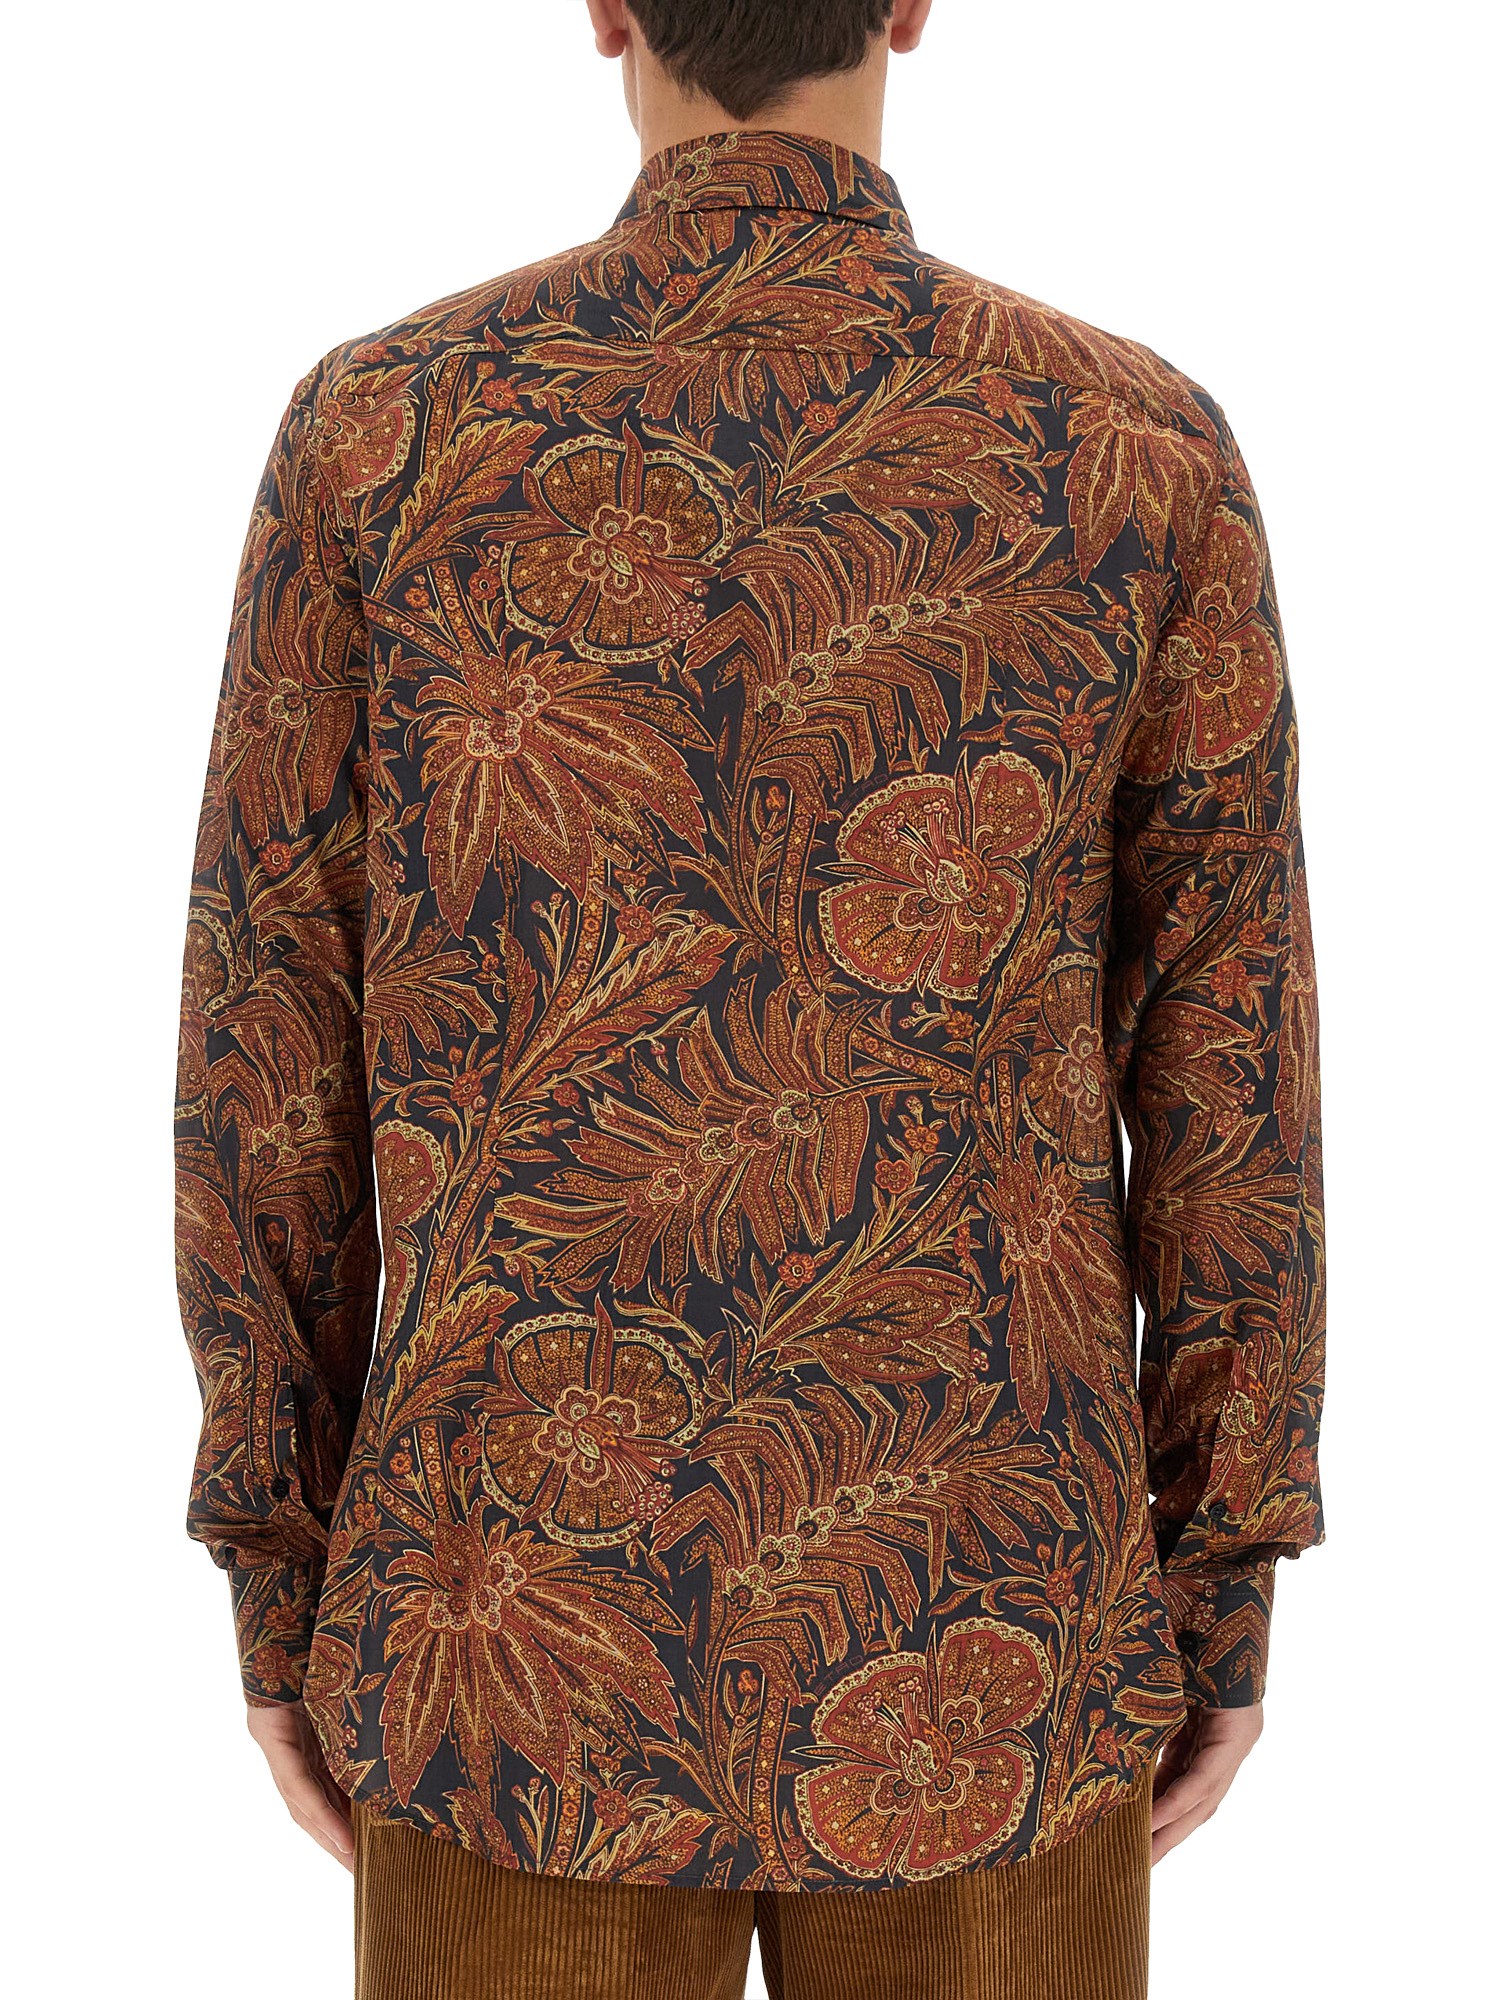 Etro Rome Shirt In Brown